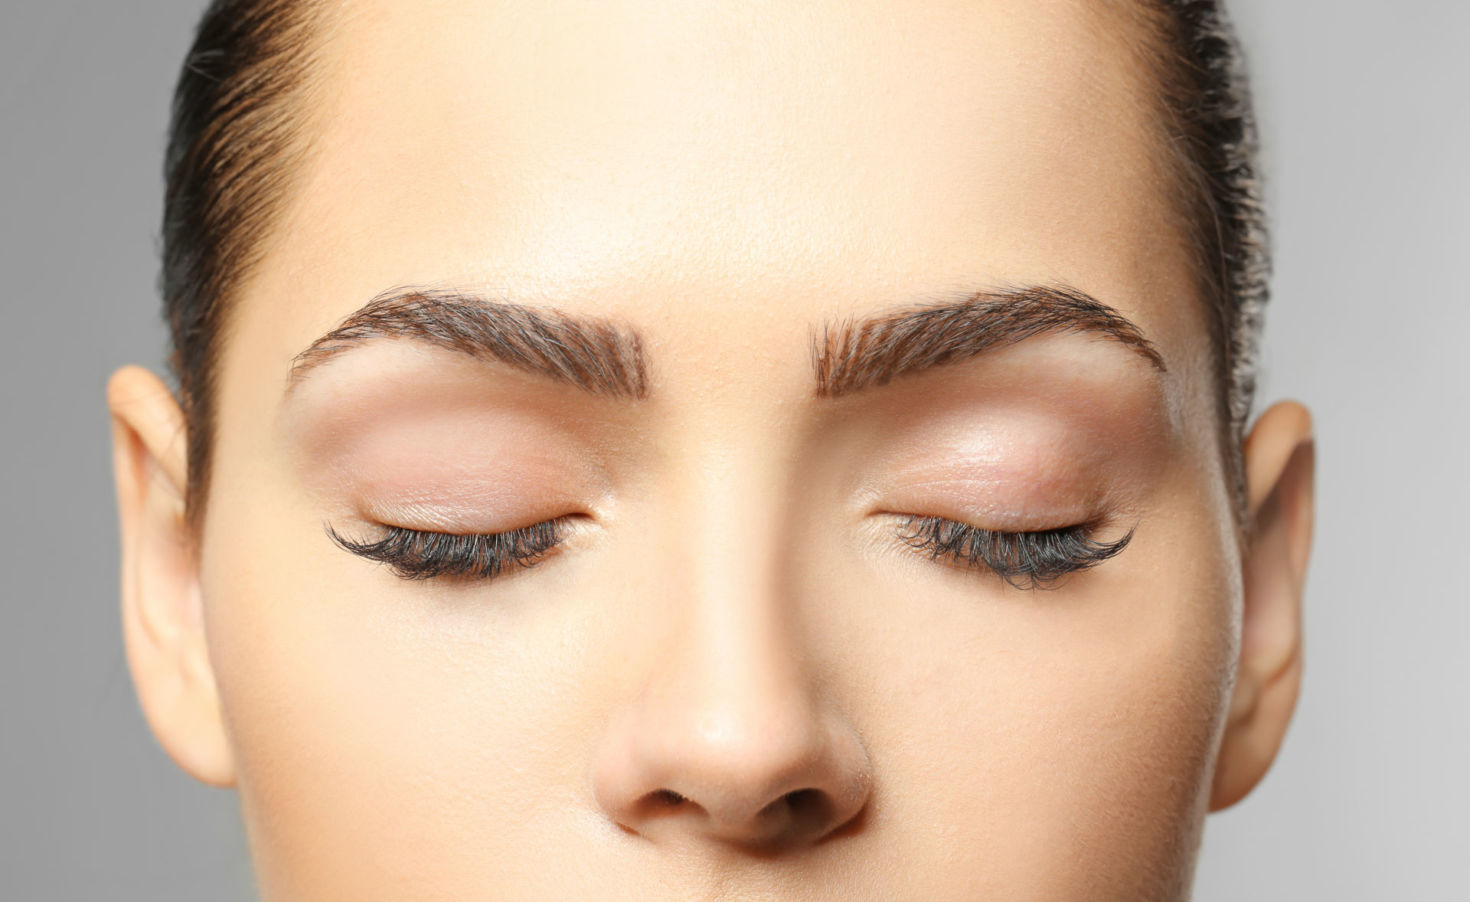 3 things for microblade preparation, every microblading master has to know! 1